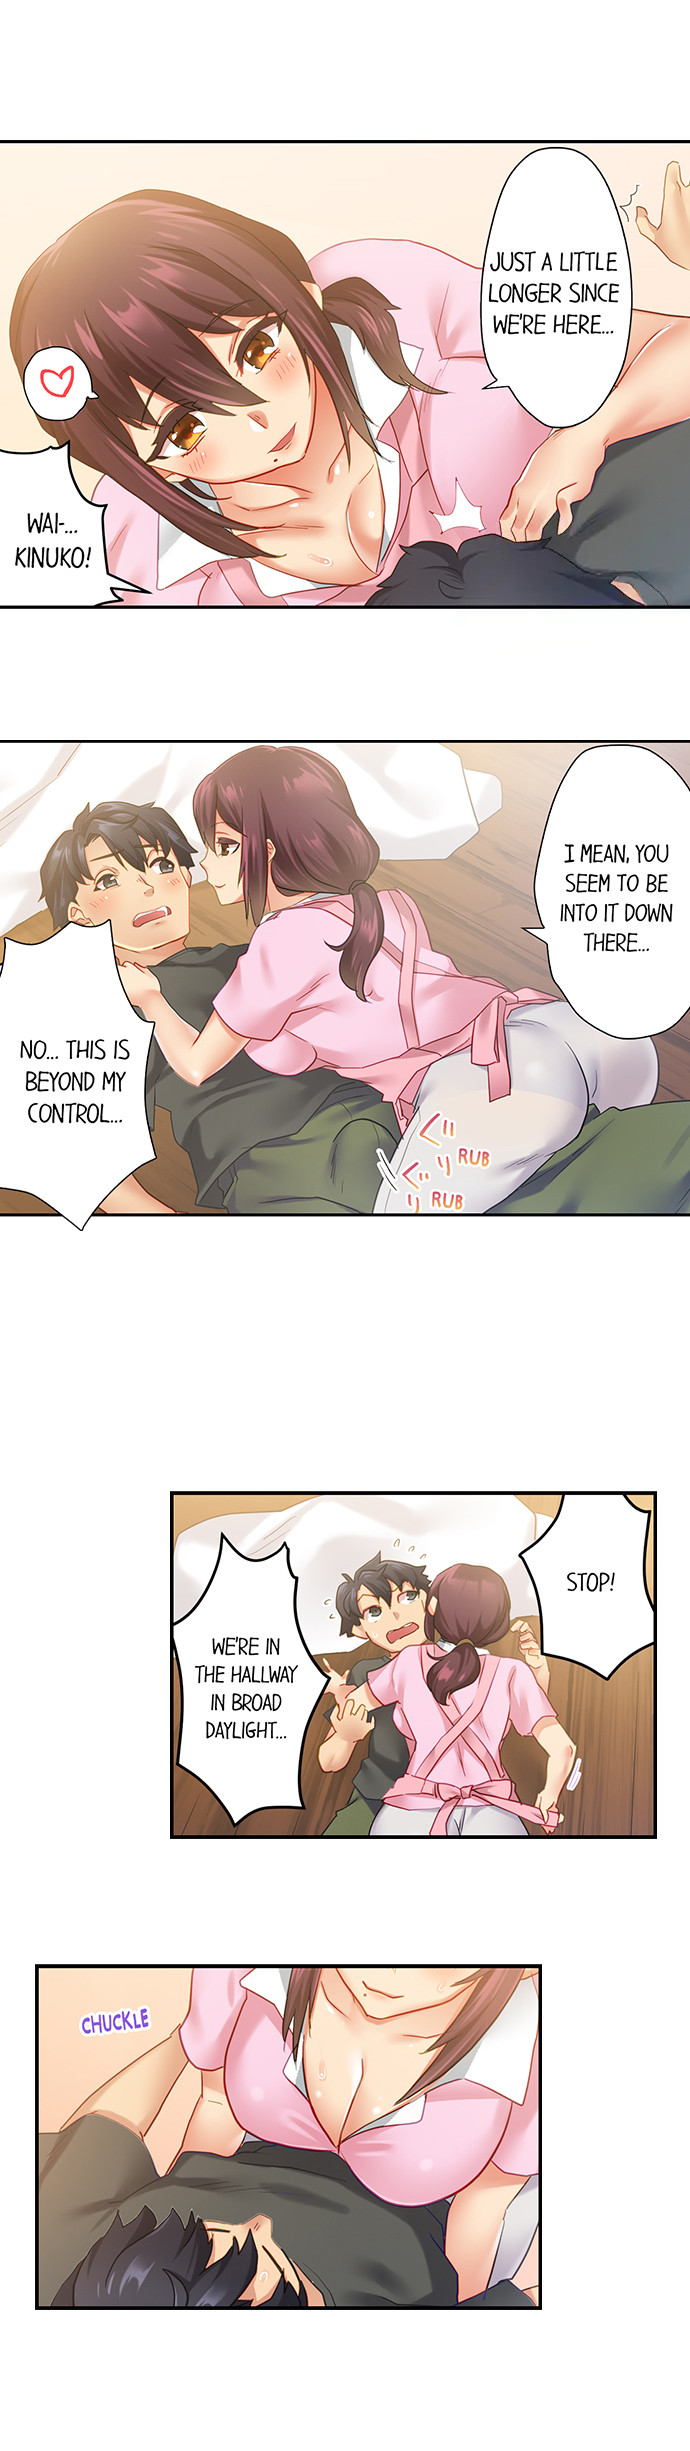 Risky Family Planning - Chapter 5 Page 2